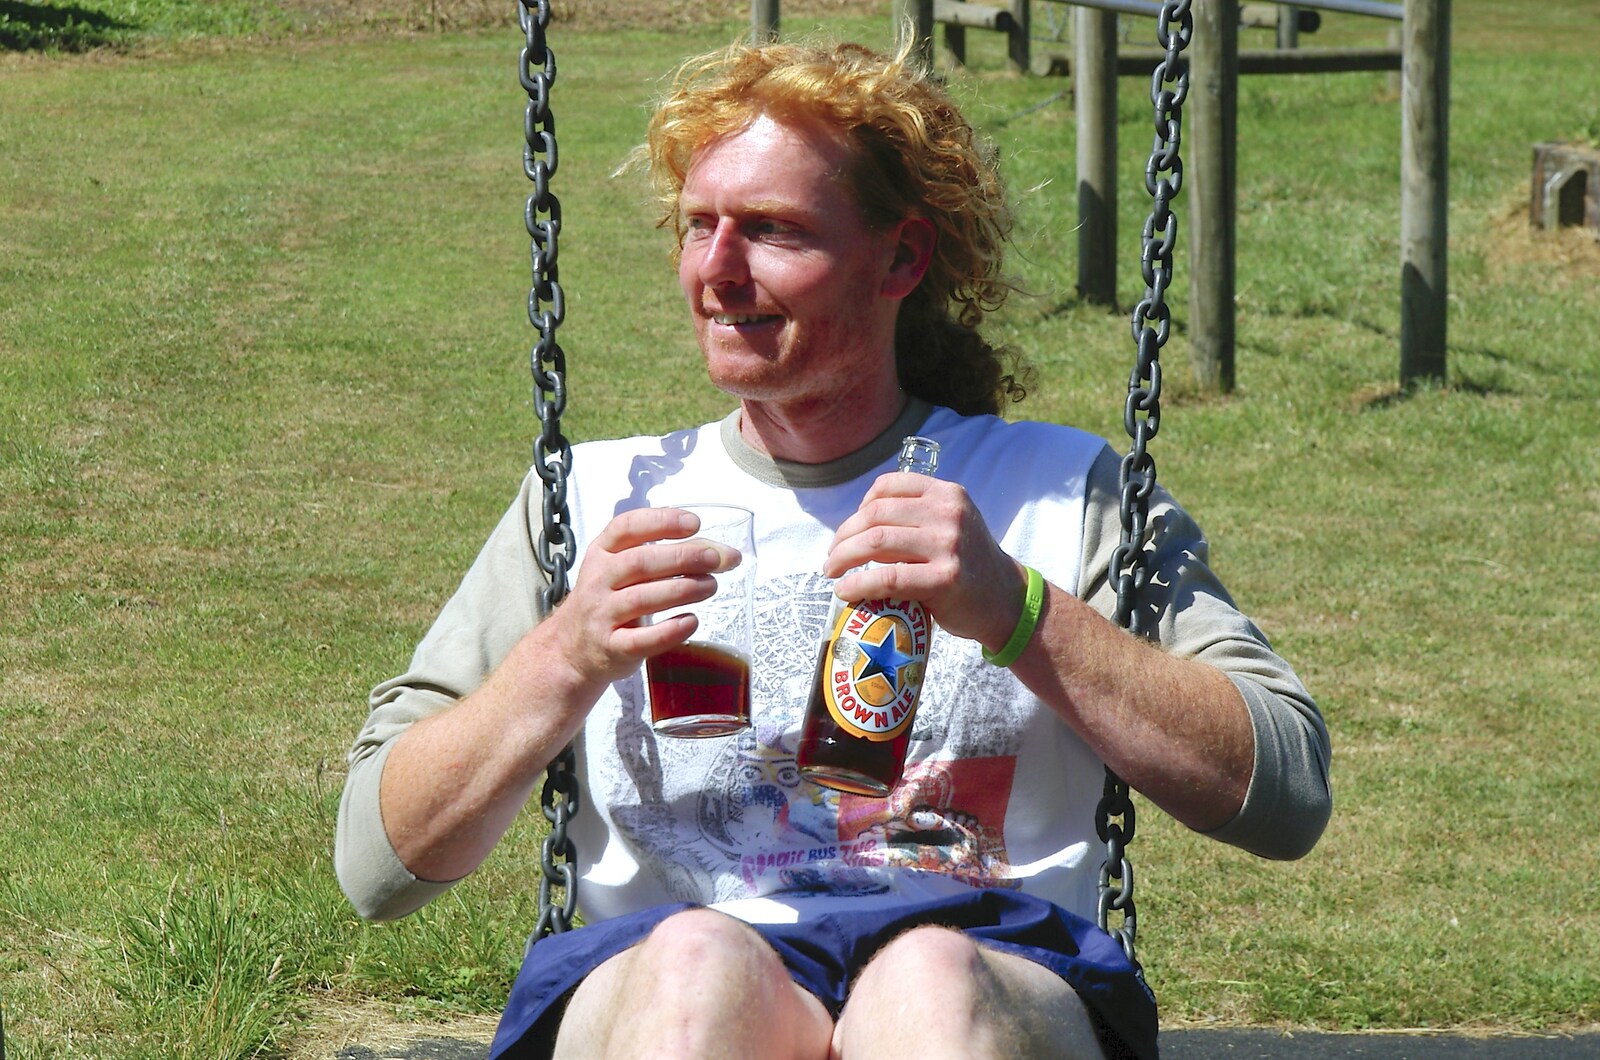 Wavy swings around with a Newcastle Brown from The BSCC Charity Bike Ride, Orford, Suffolk - 15th July 2006